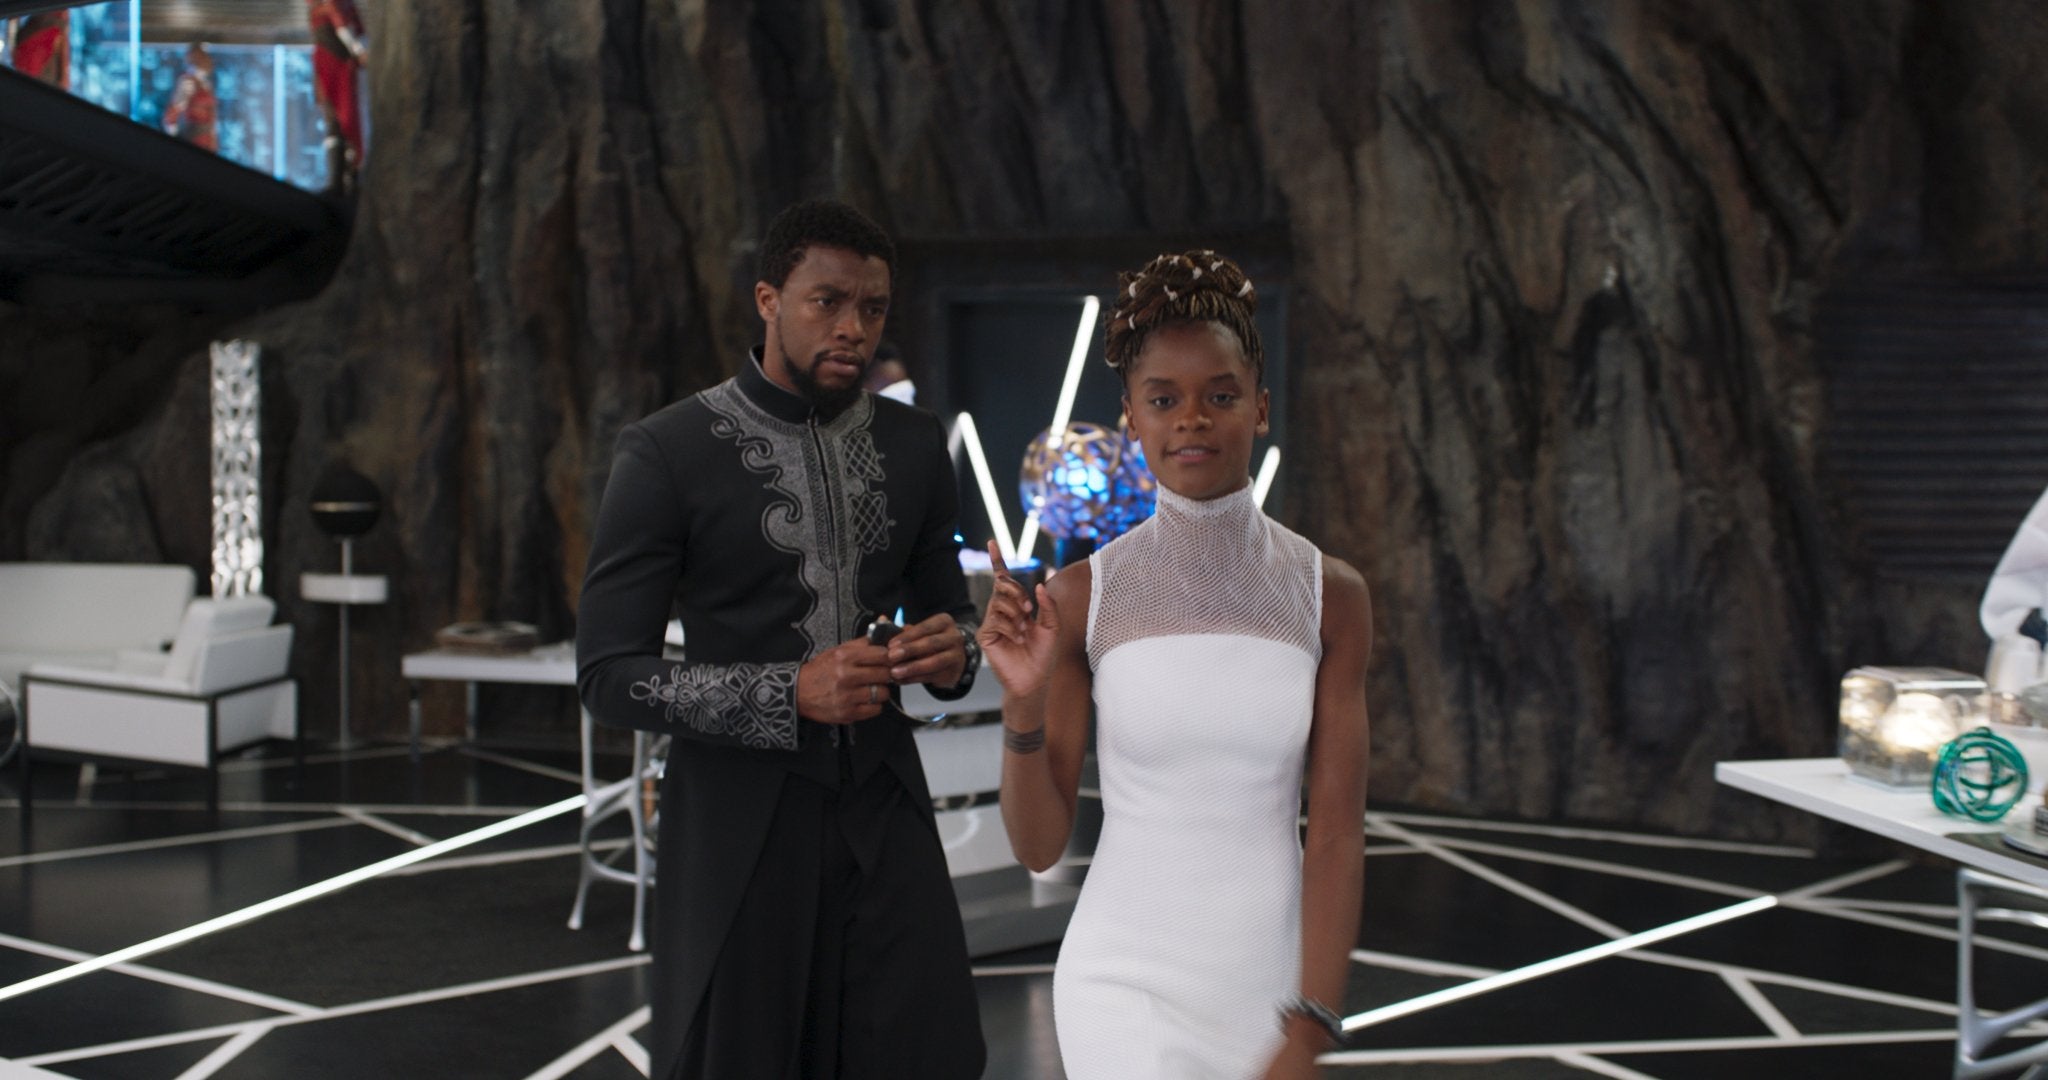 'Black Panther' Wins At the Box Office Again, Becomes 7th Highest Grossing Film In U.S. History
